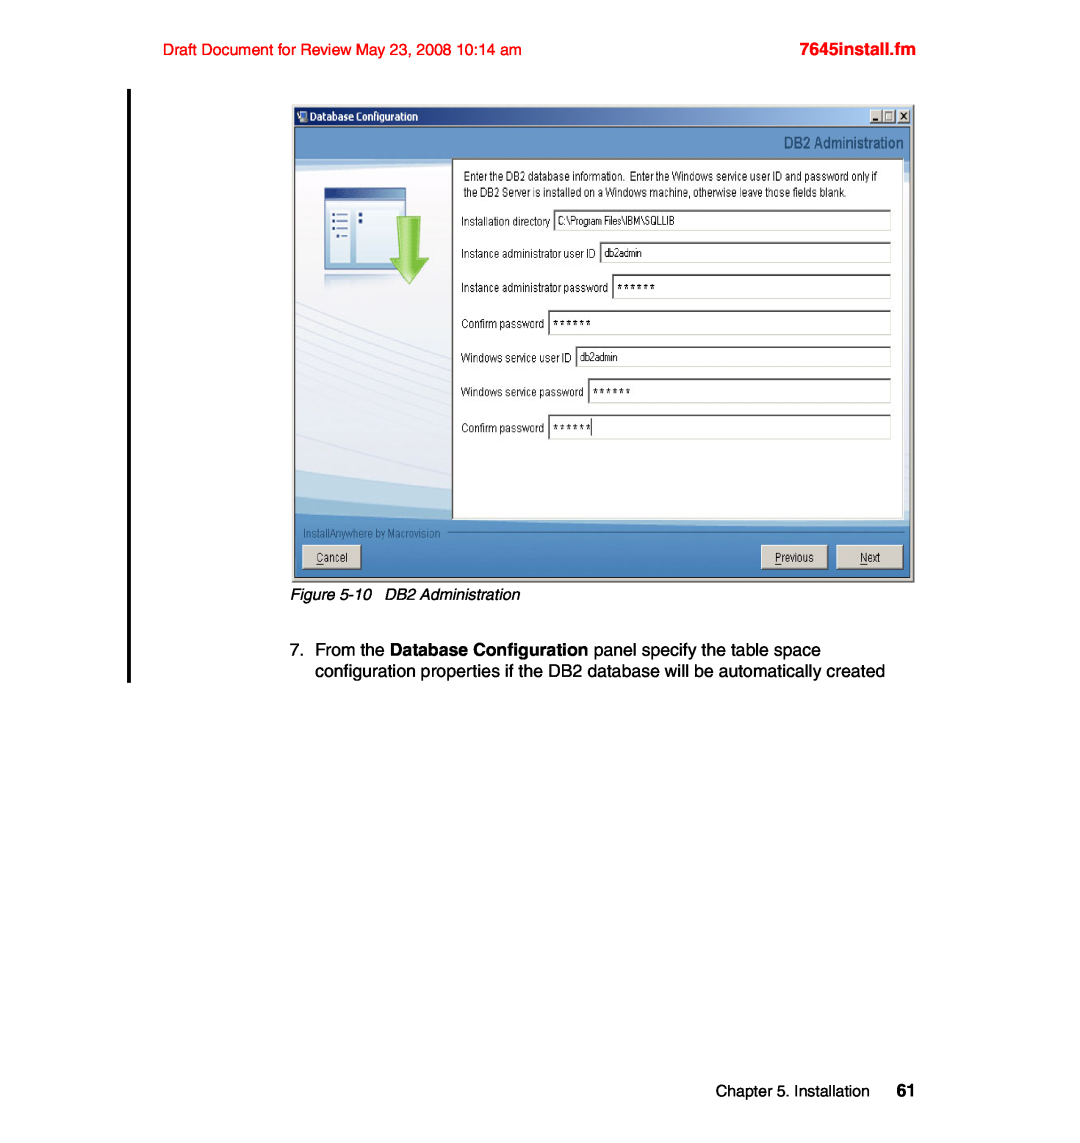 IBM SG24-7645-00 manual 7645install.fm, Draft Document for Review May 23, 2008 10:14 am, 10DB2 Administration 